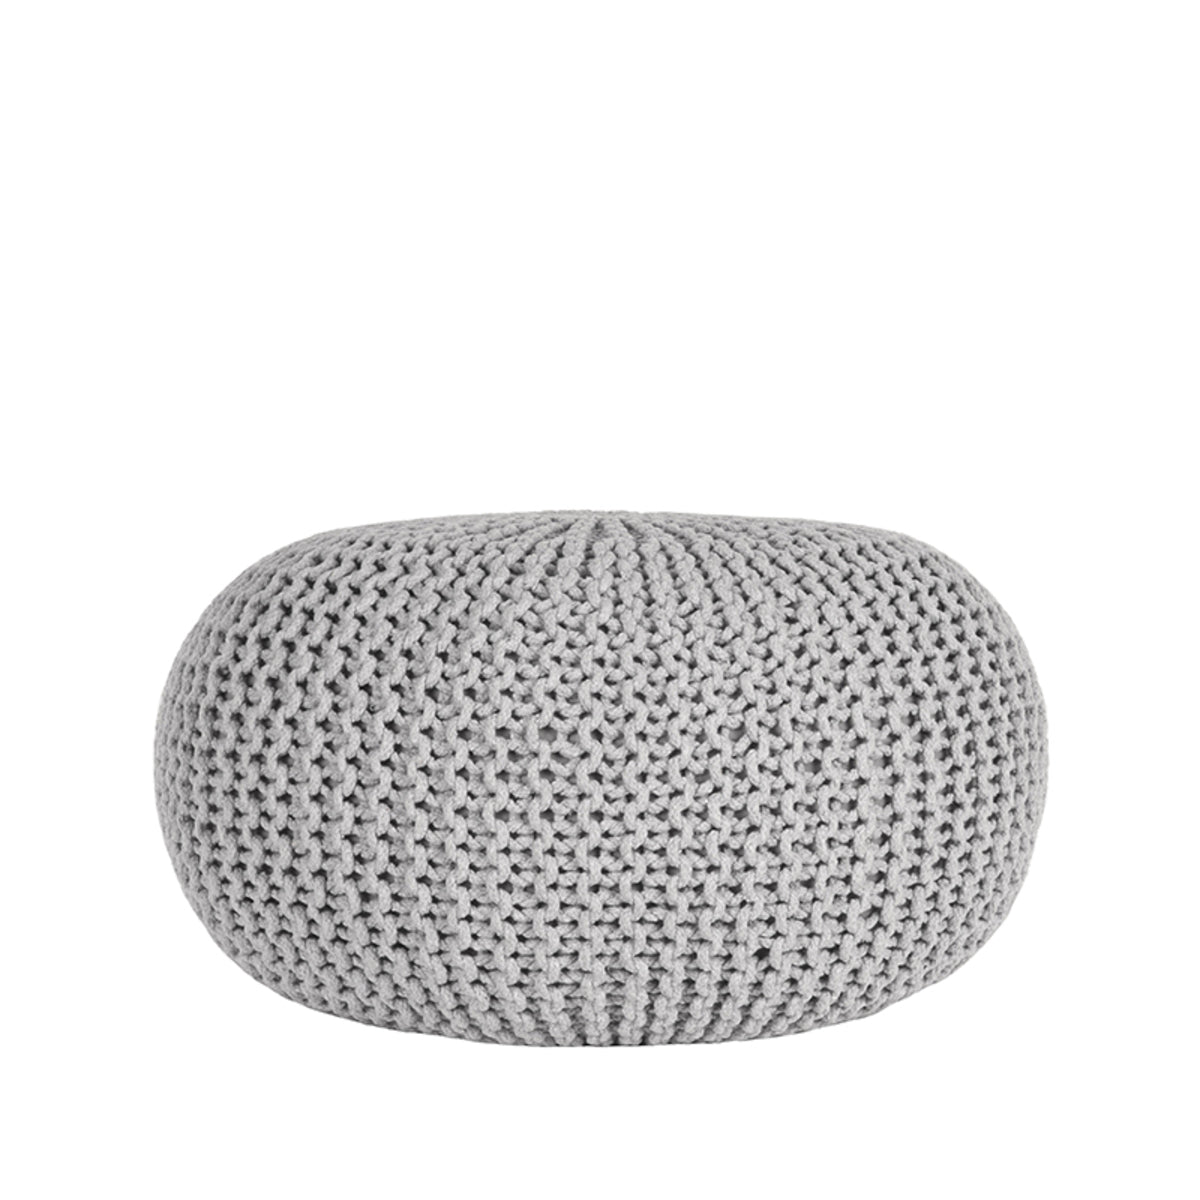 LABEL51 Pouf Knitted - Light gray - Cotton - L